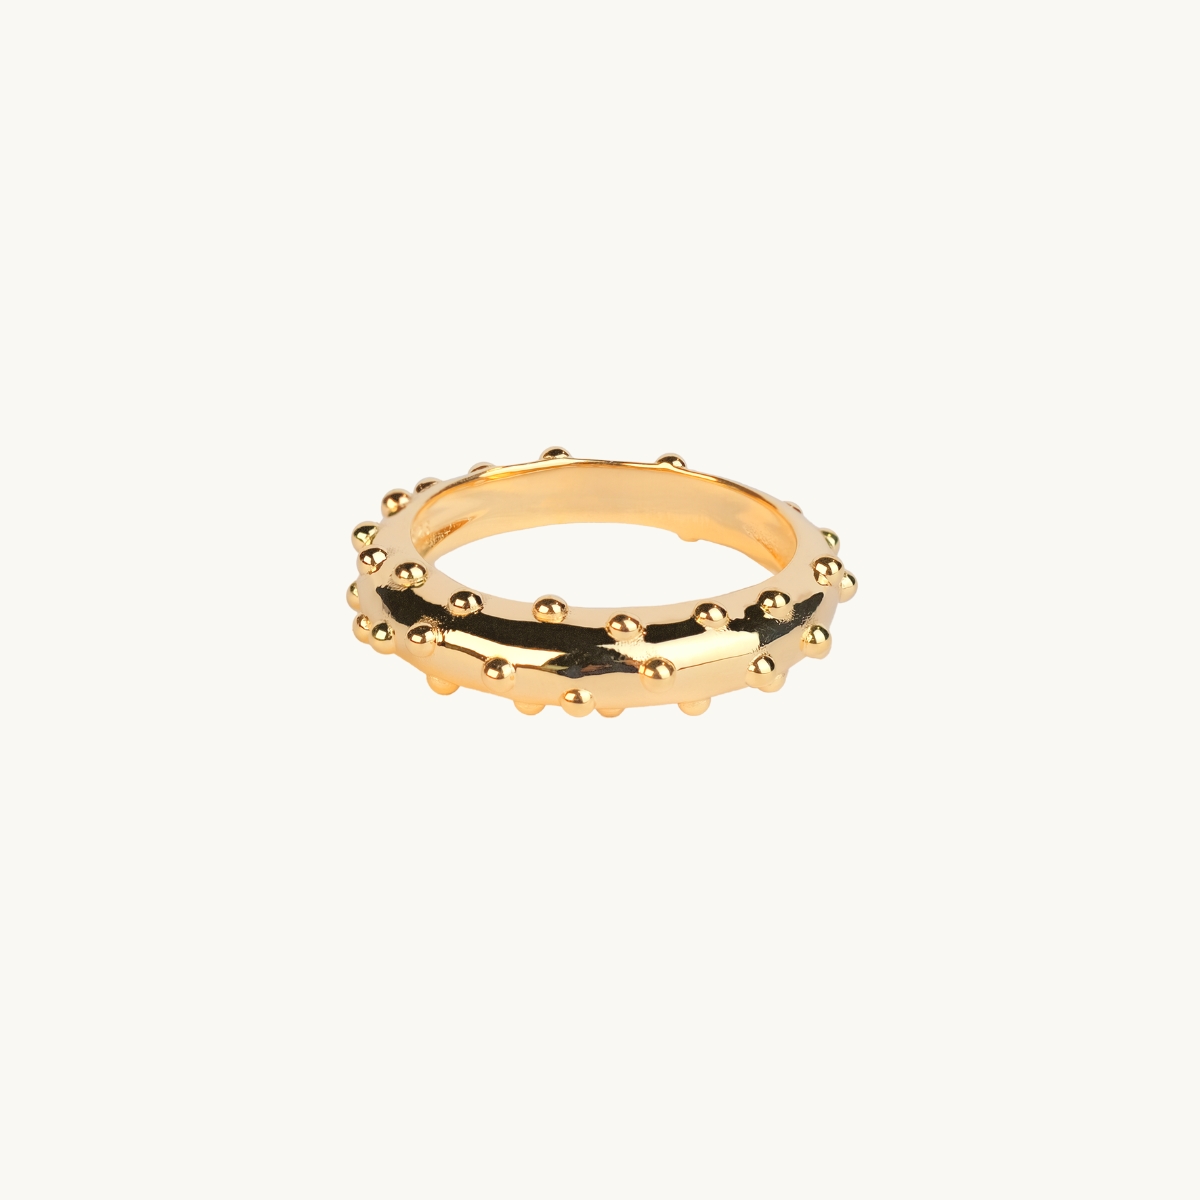 A highly polised gold ring with small dots